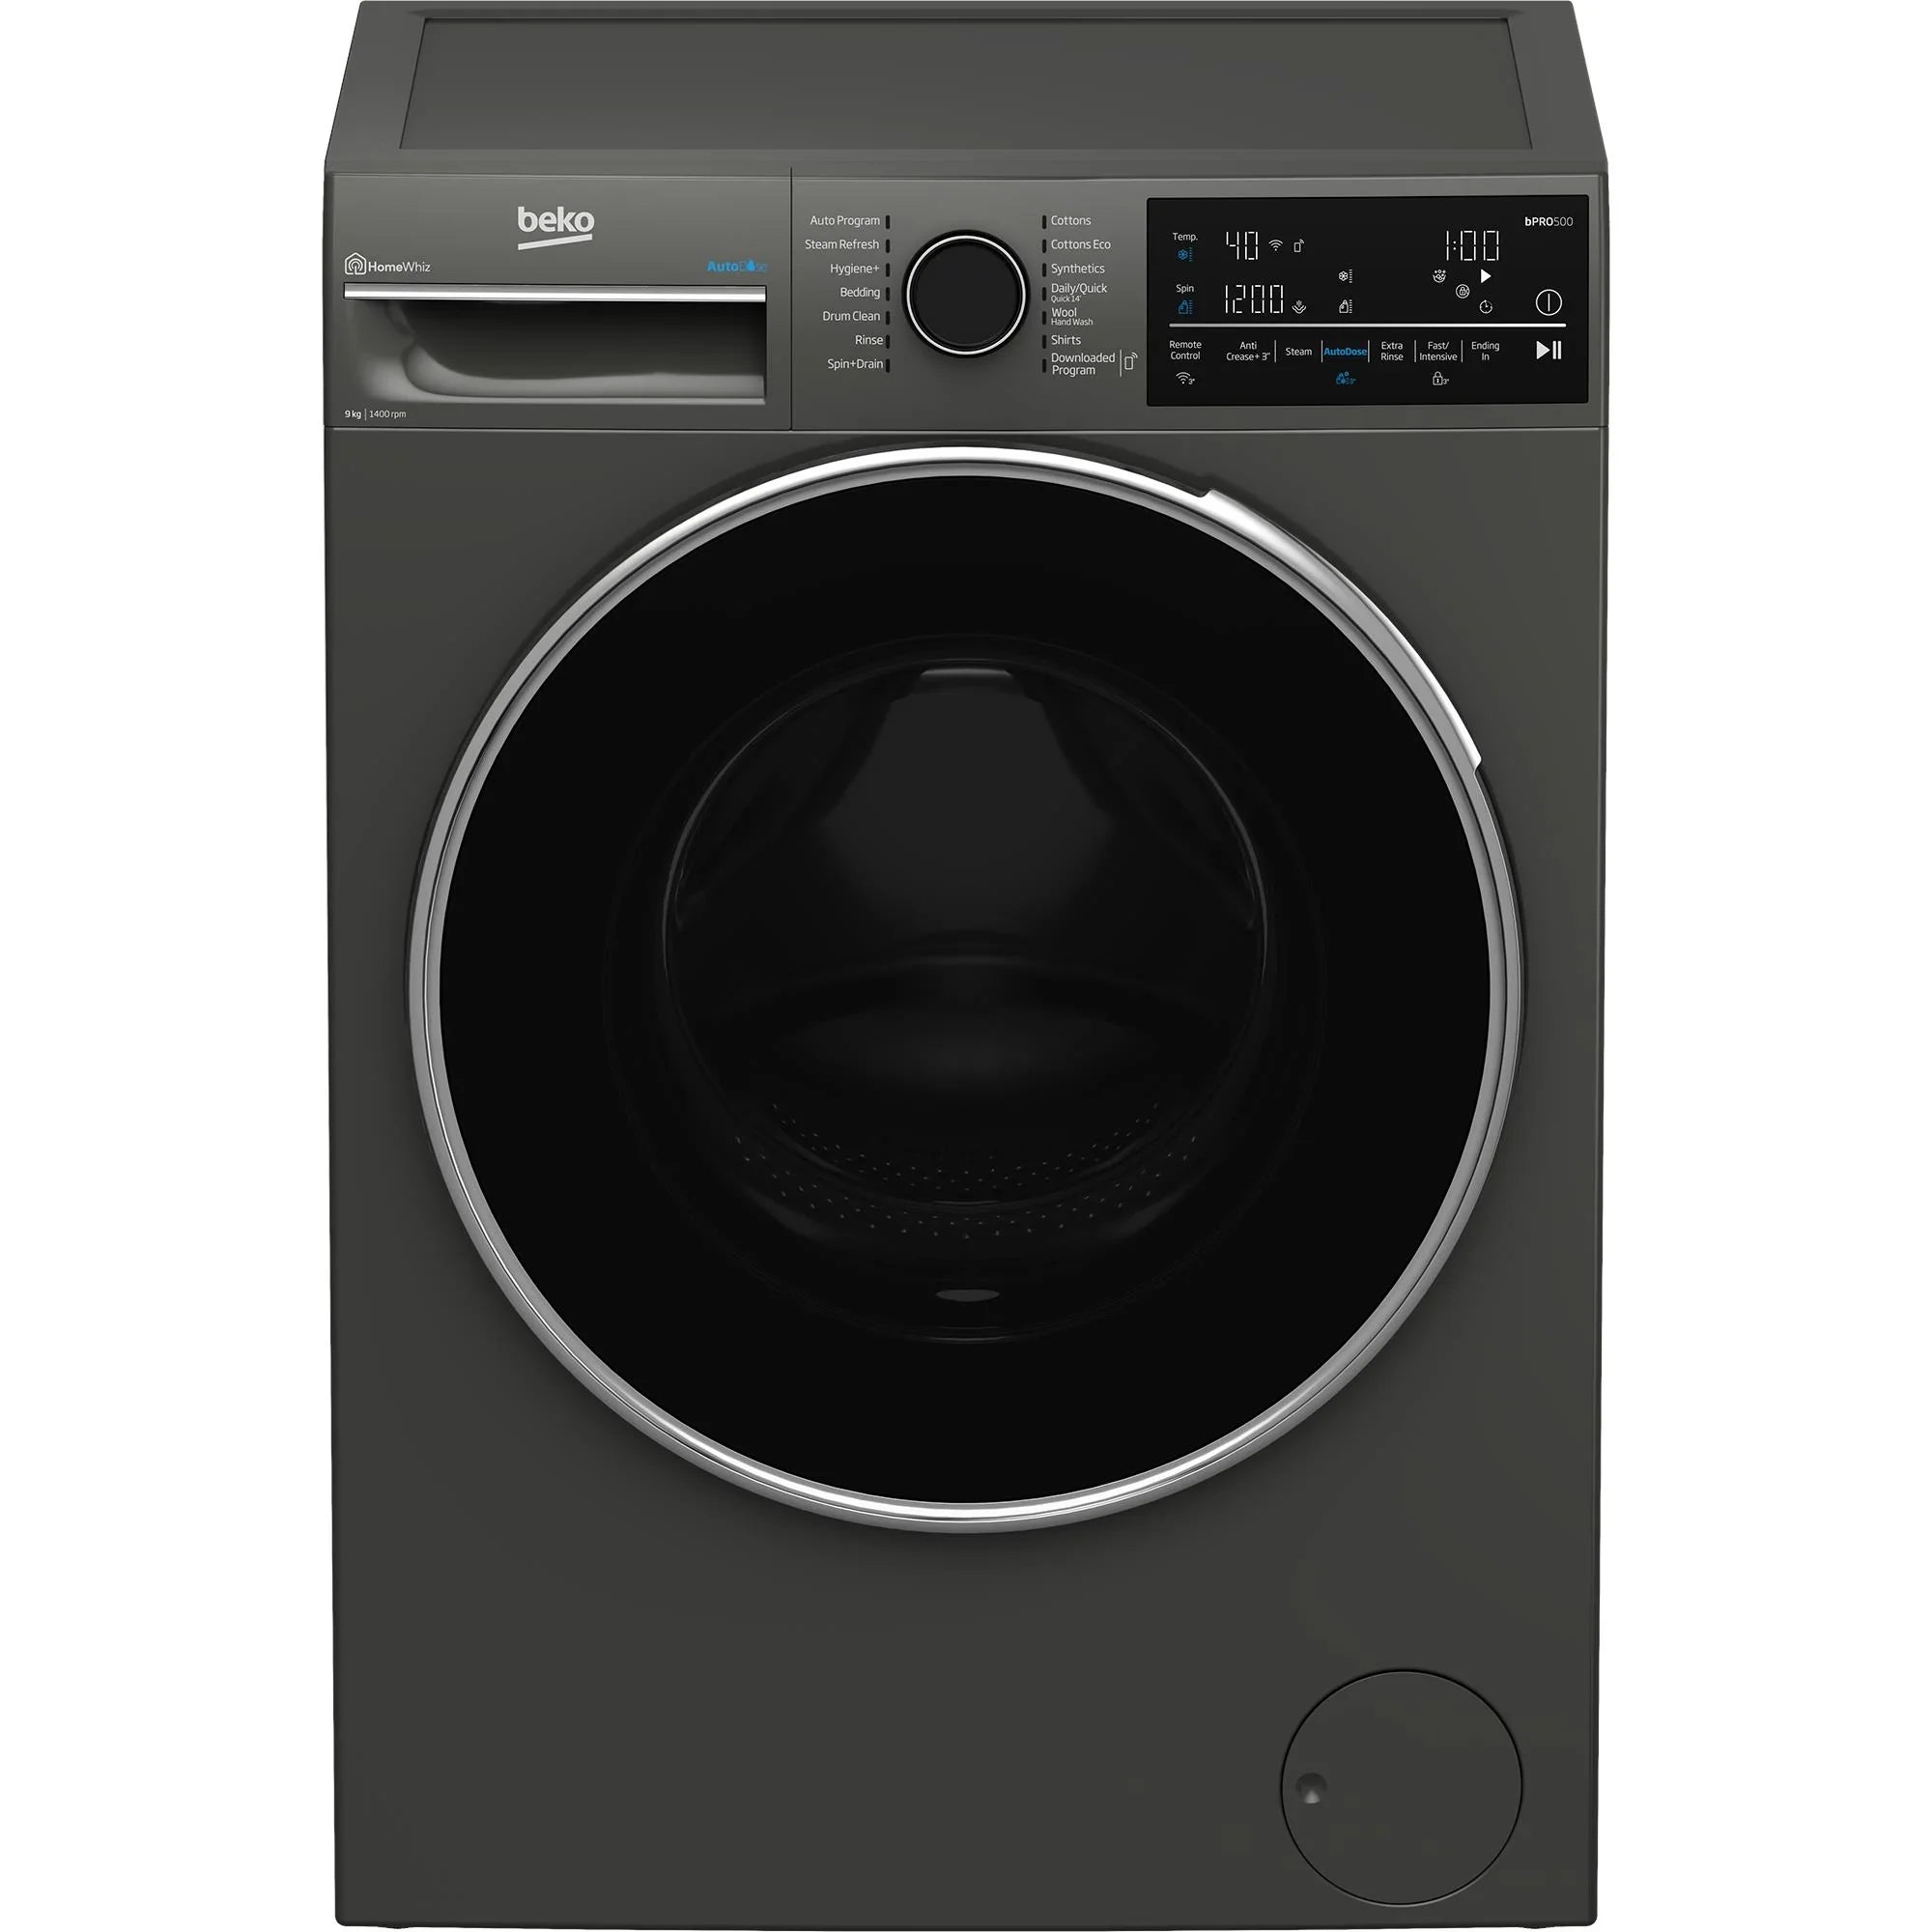 Beko 9kg Autodose WiFi Connected Washing Machine with Steam Grey